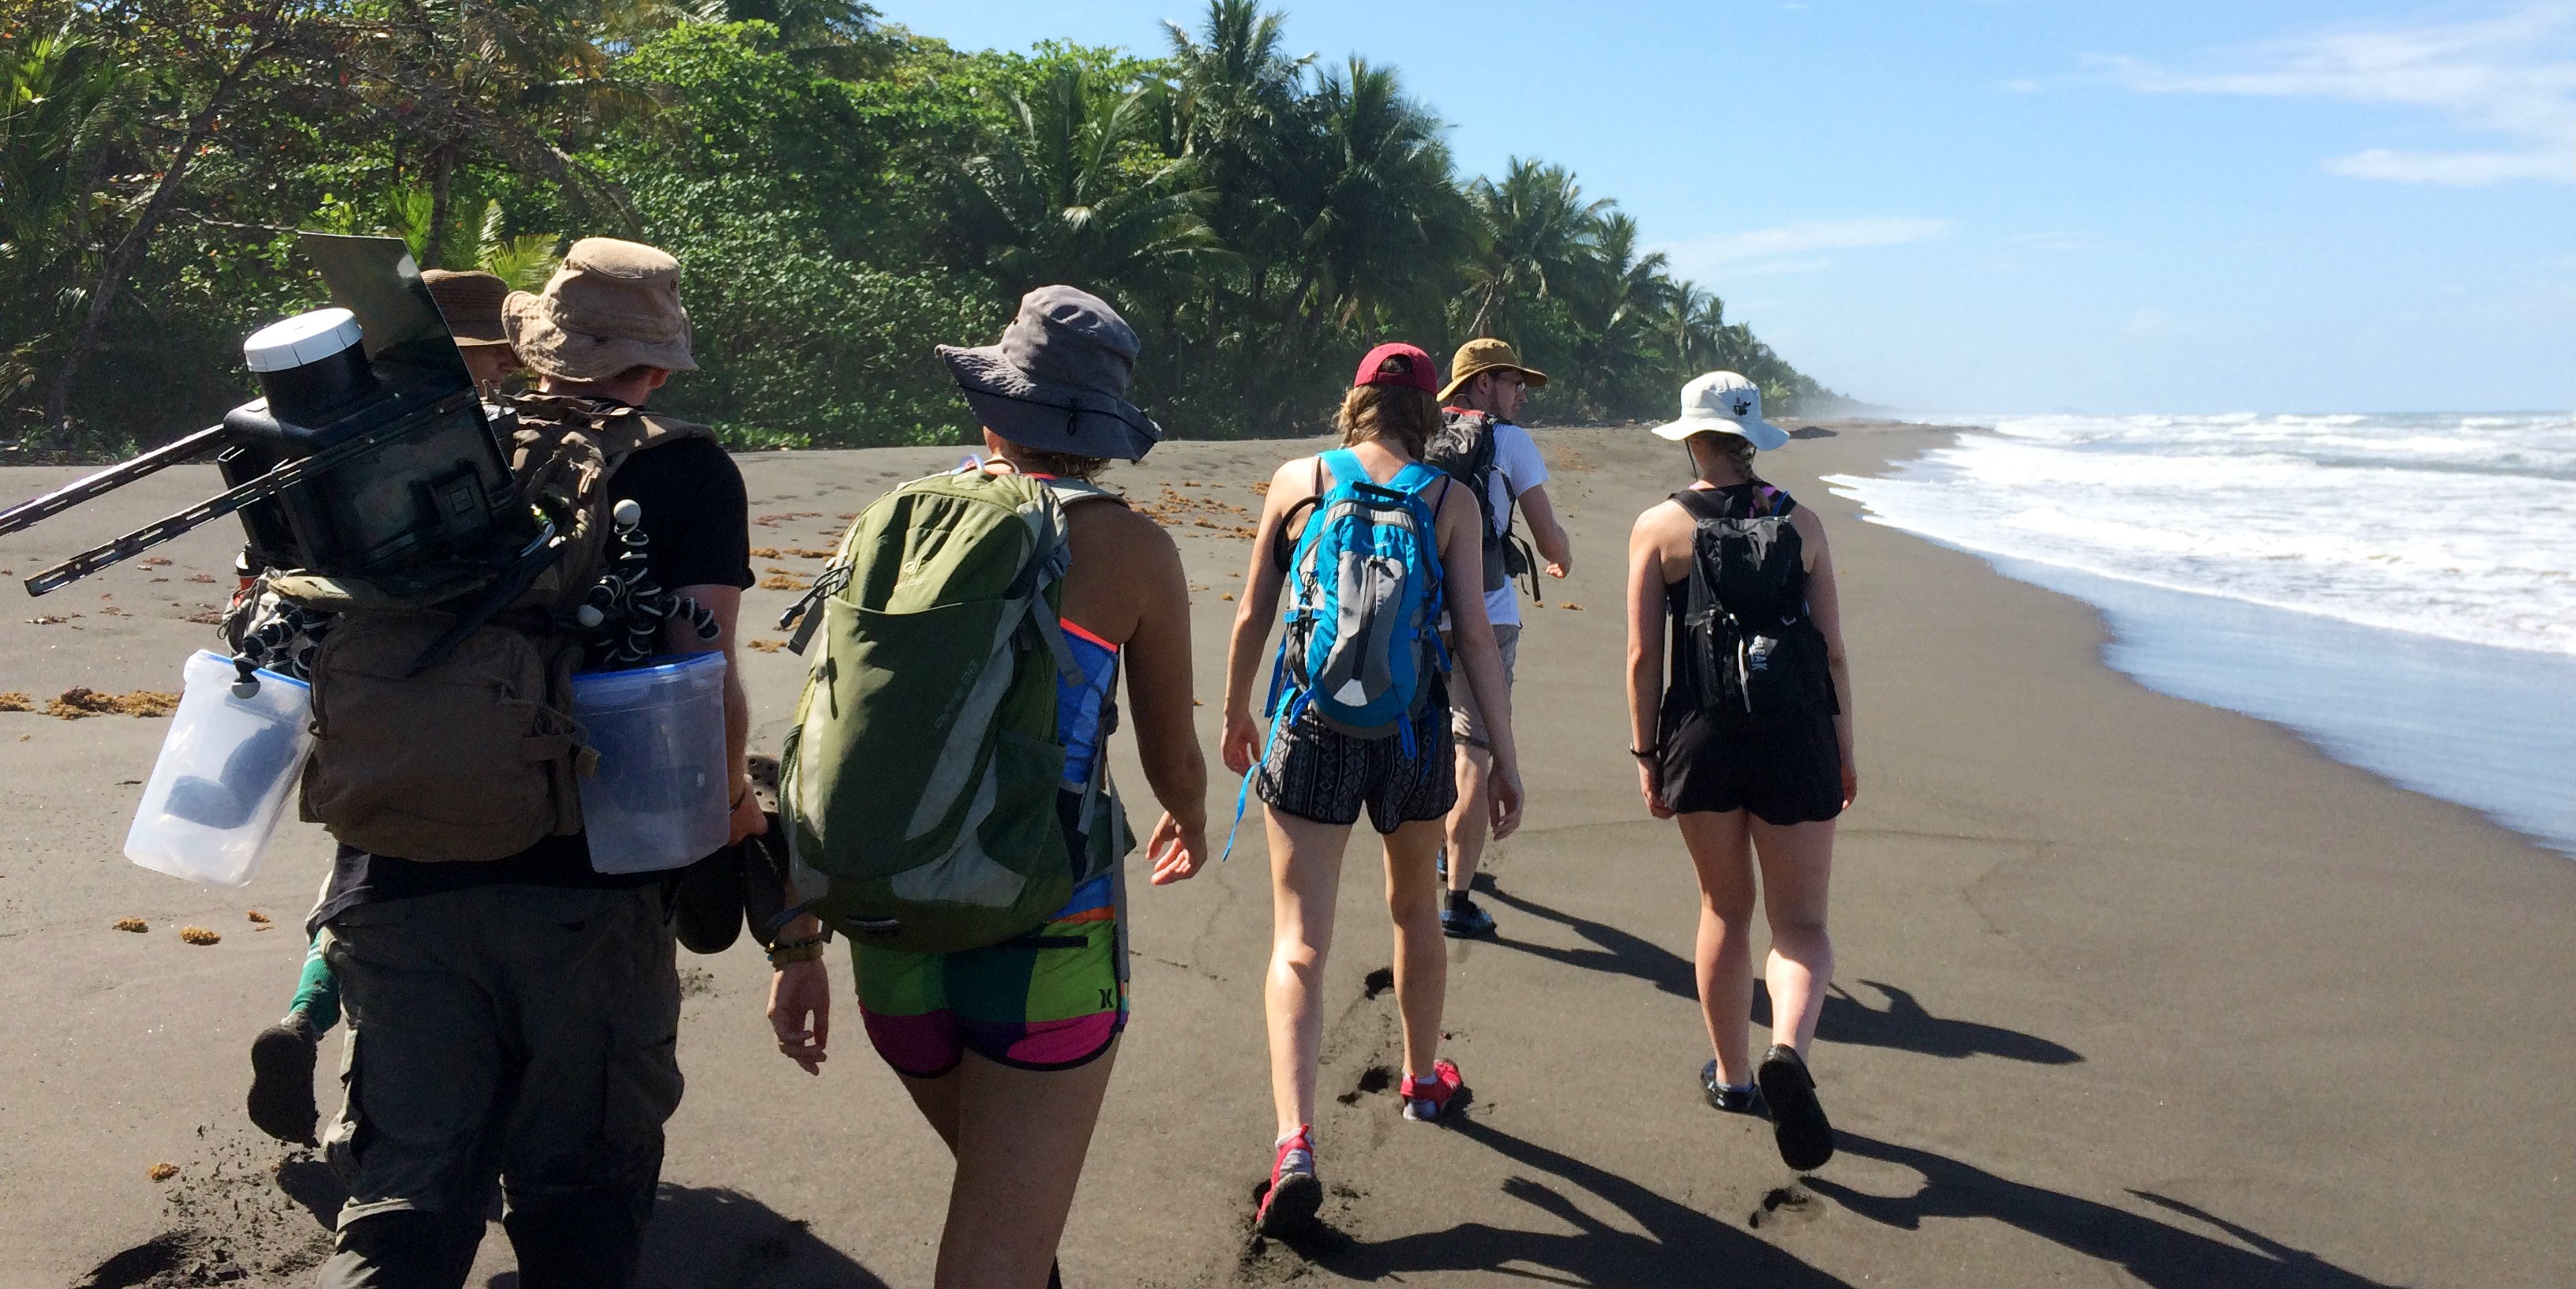 Participants start on a beach patrol, searching for signs of jaguars, or Costa Rica sea turtles.